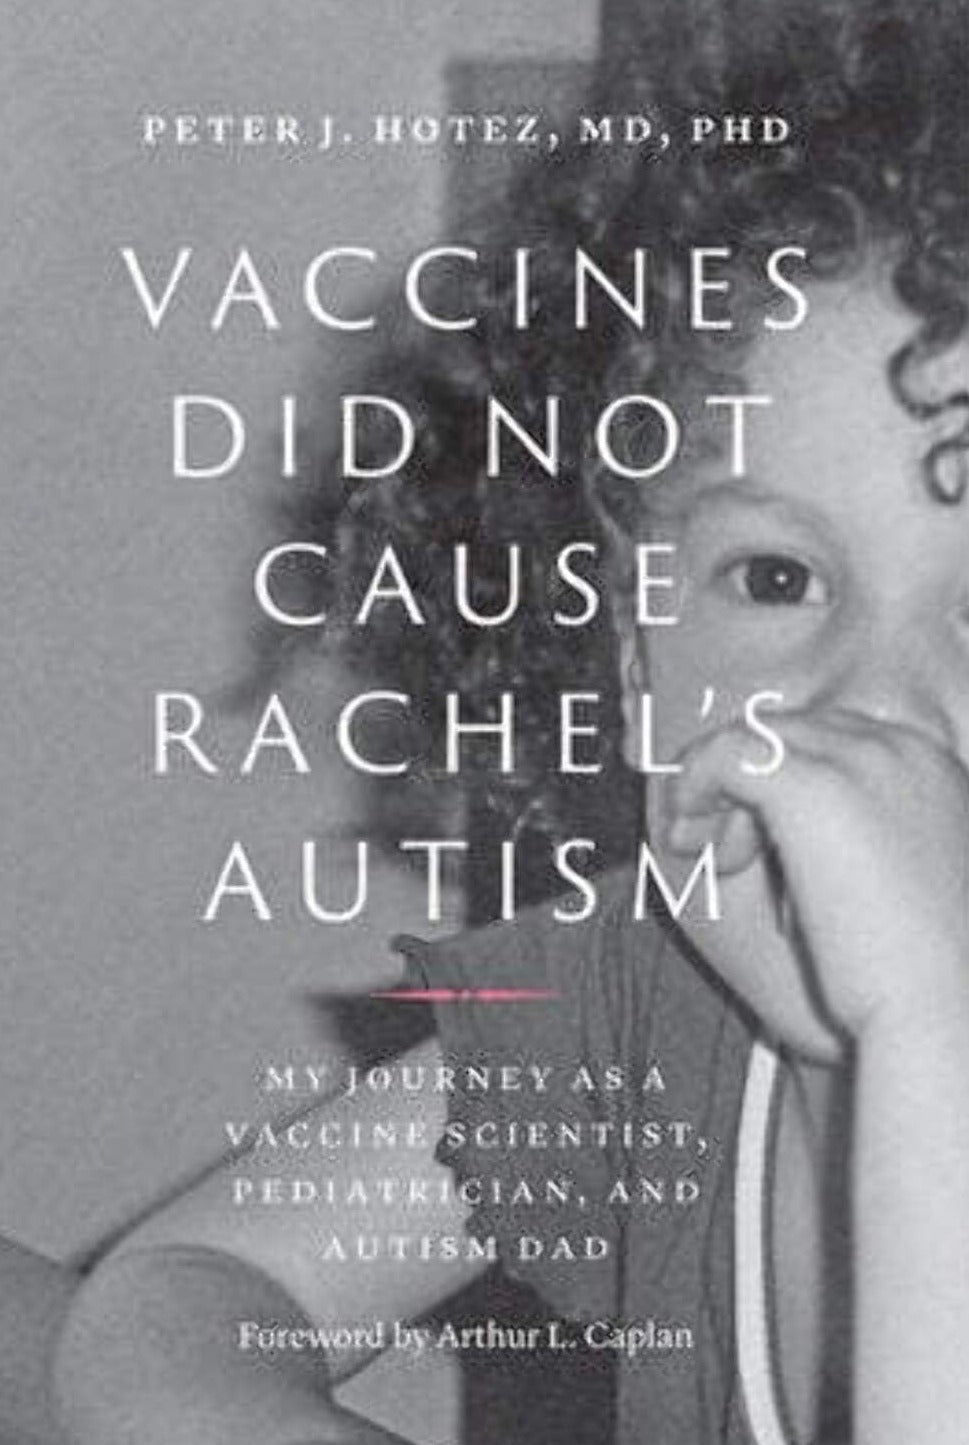 Vaccines Did Not Cause Rachel's Autism - My Journey as a Vaccine Scientist, Pediatrician, and Autism Dad